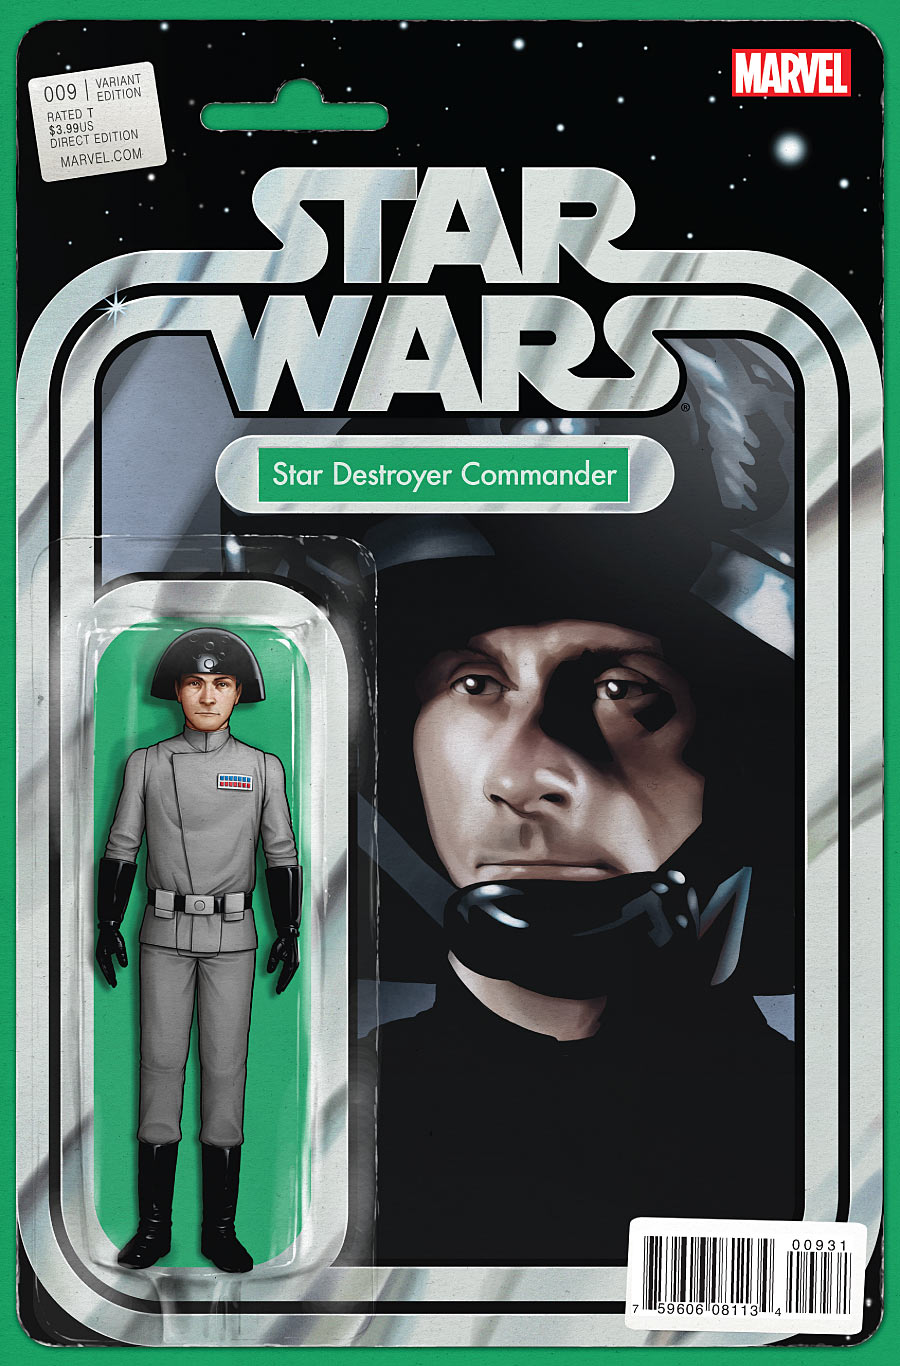 Star Wars #9 (Action Figure Variant Cover) (16.09.2015)